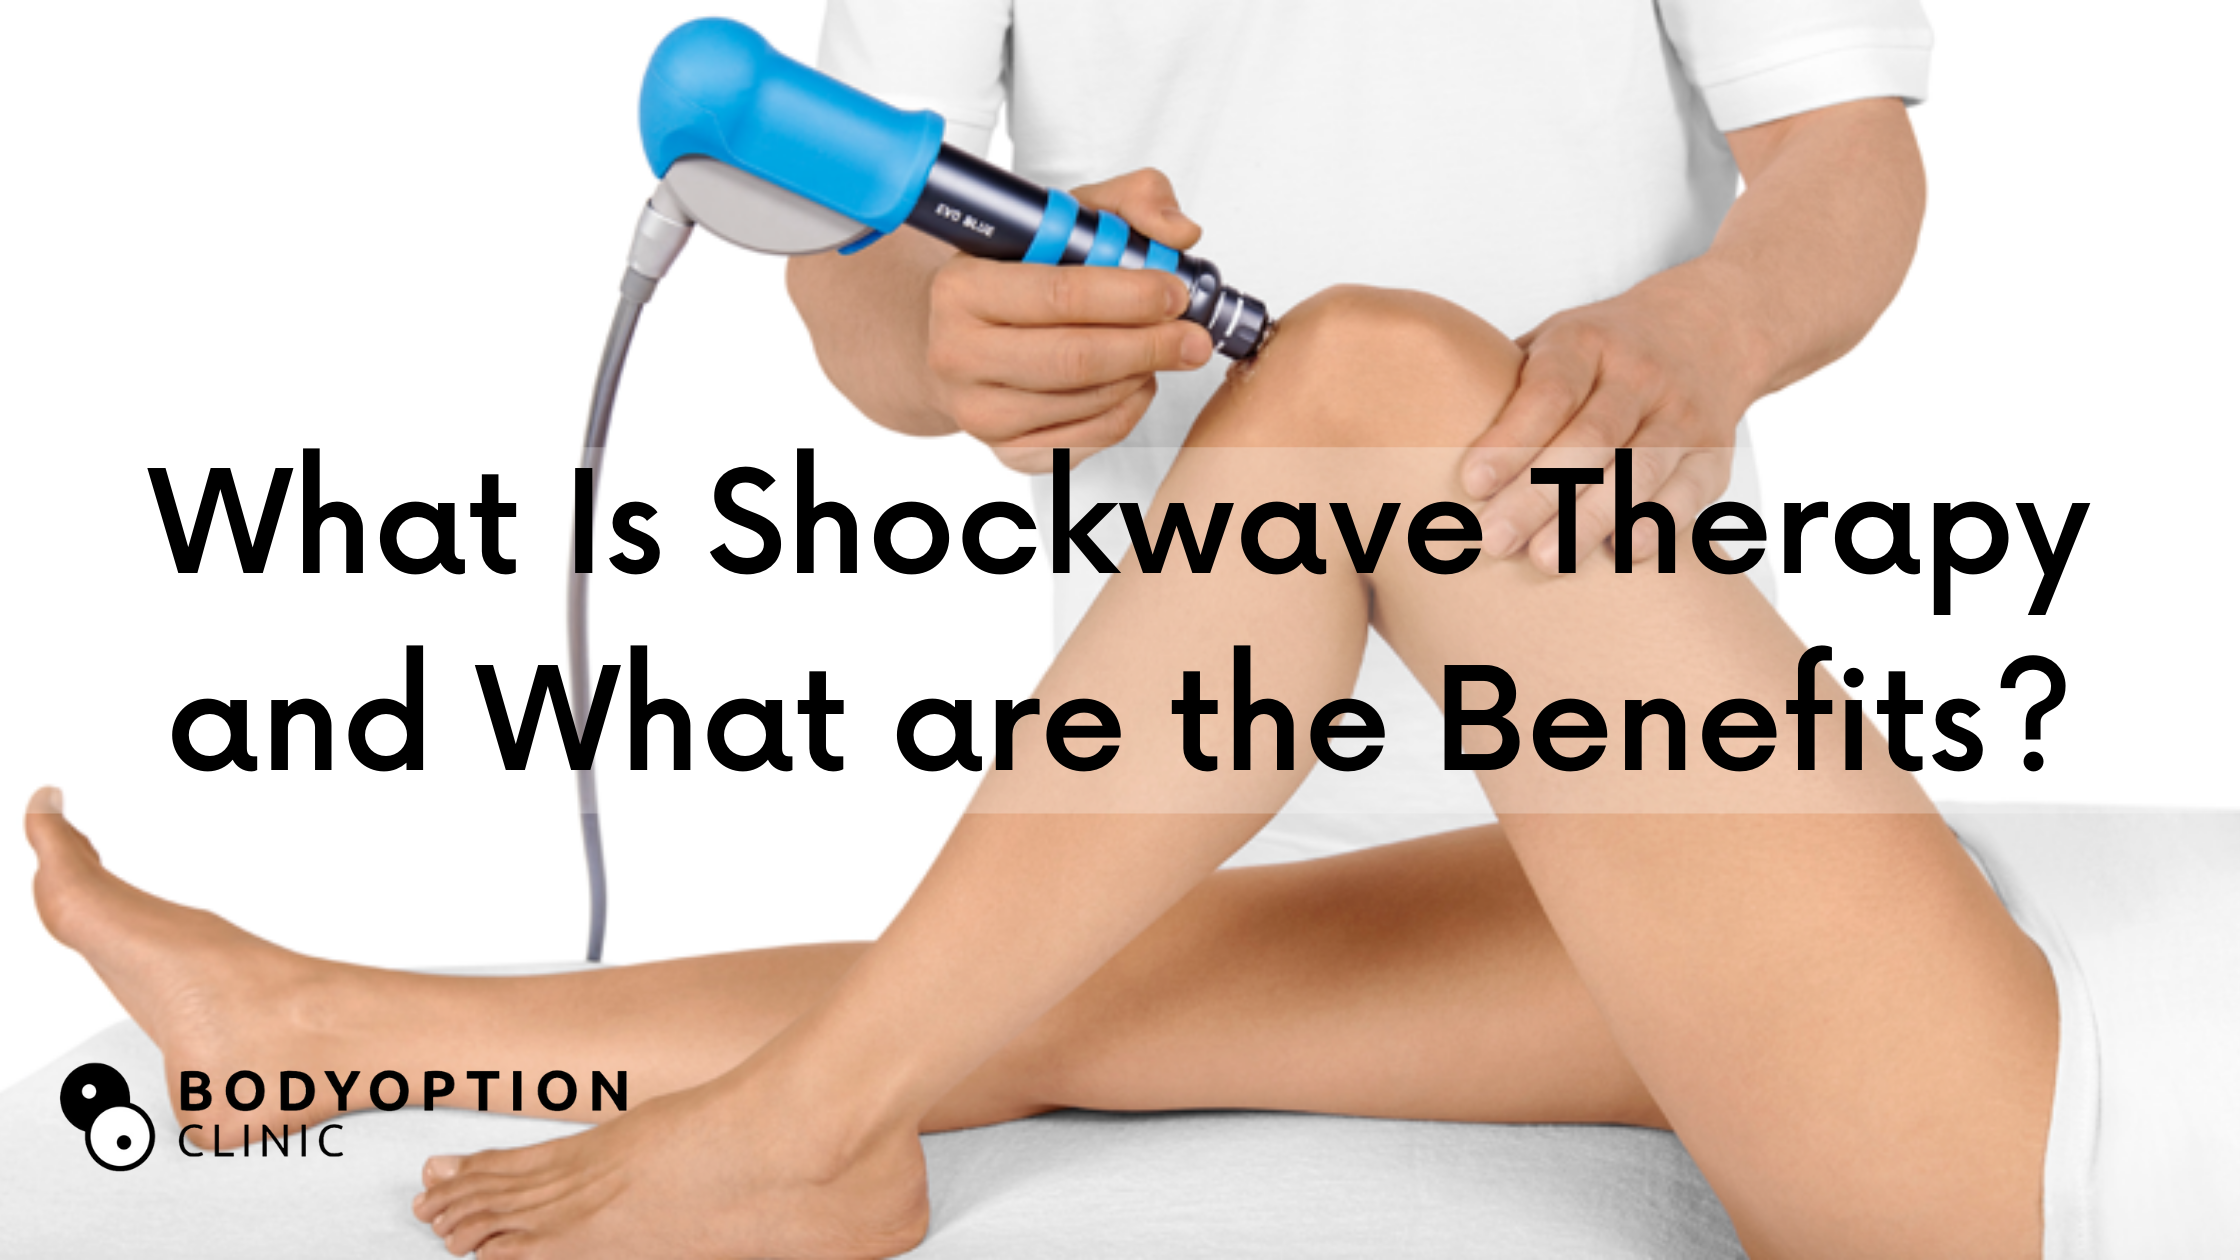 What Is Shockwave Therapy and What are the Benefits?